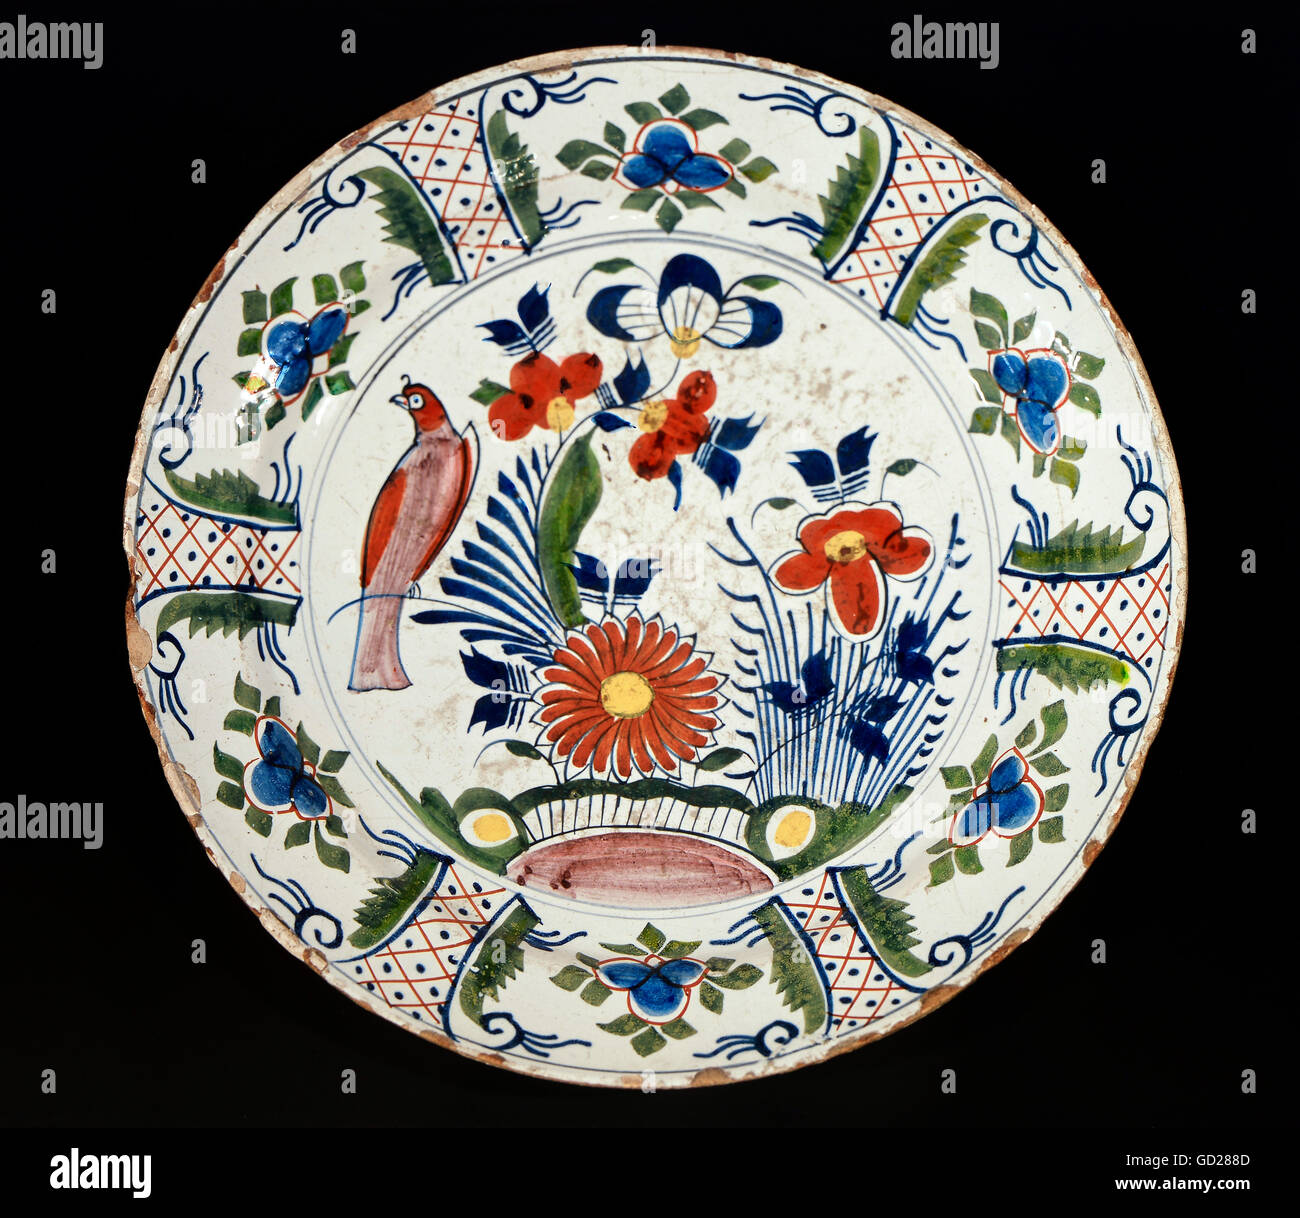 fine arts, faience, plate in Chinese stile, diameter 35 cm, Delft, 18th century, De Porceleyne Fles, Delft, Artist's Copyright has not to be cleared Stock Photo